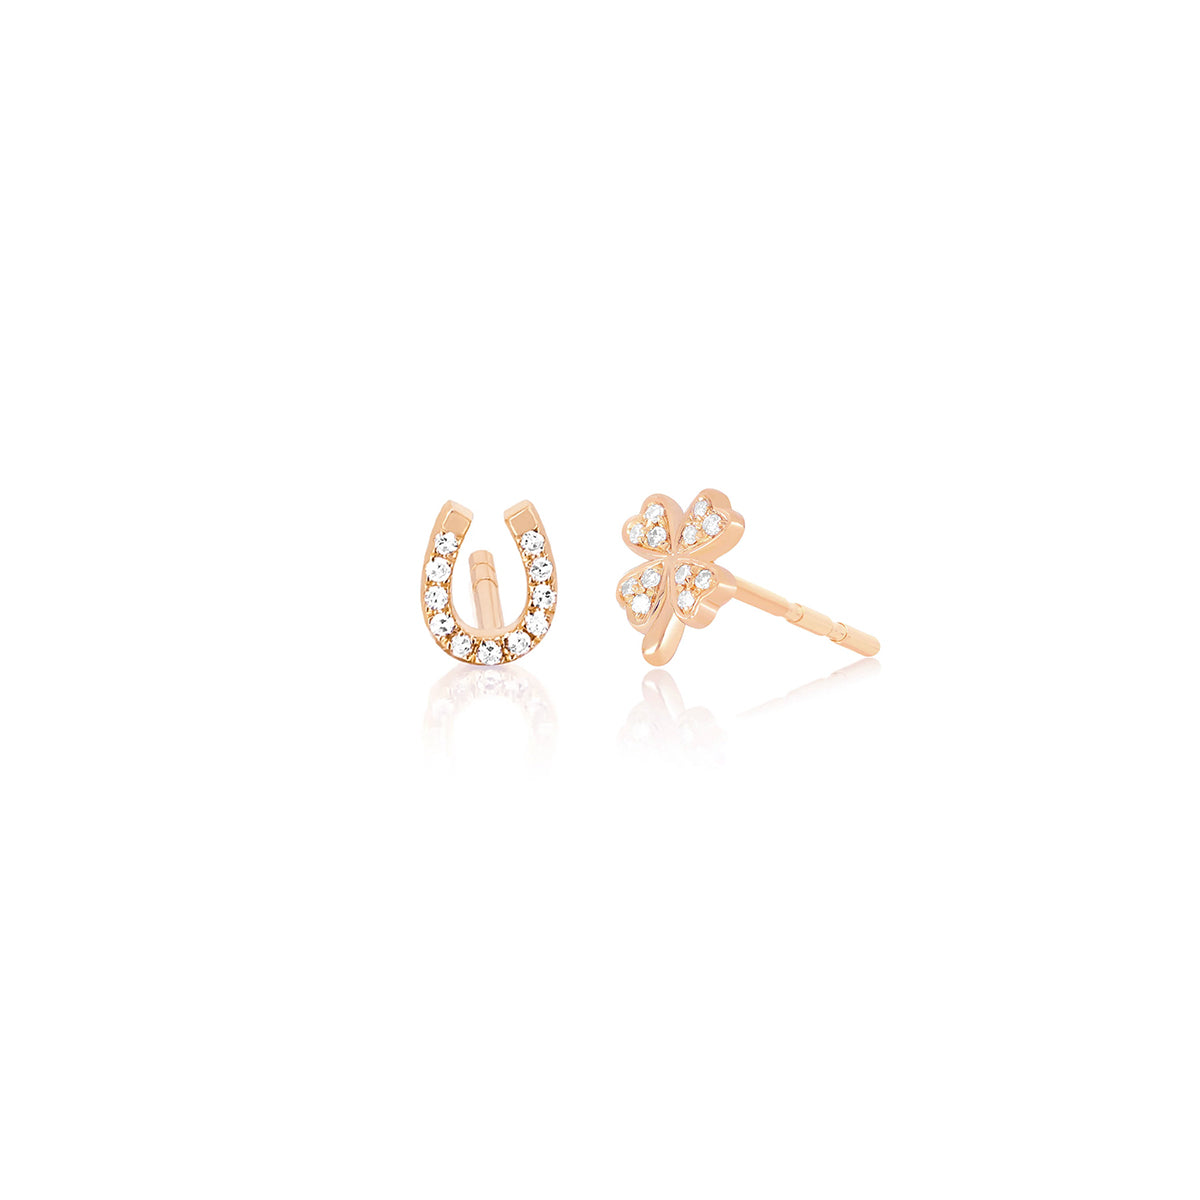 The Lucky Set in 14k Rose Gold featuring 1 Horse Shoe Stud and 1 Clover Stud